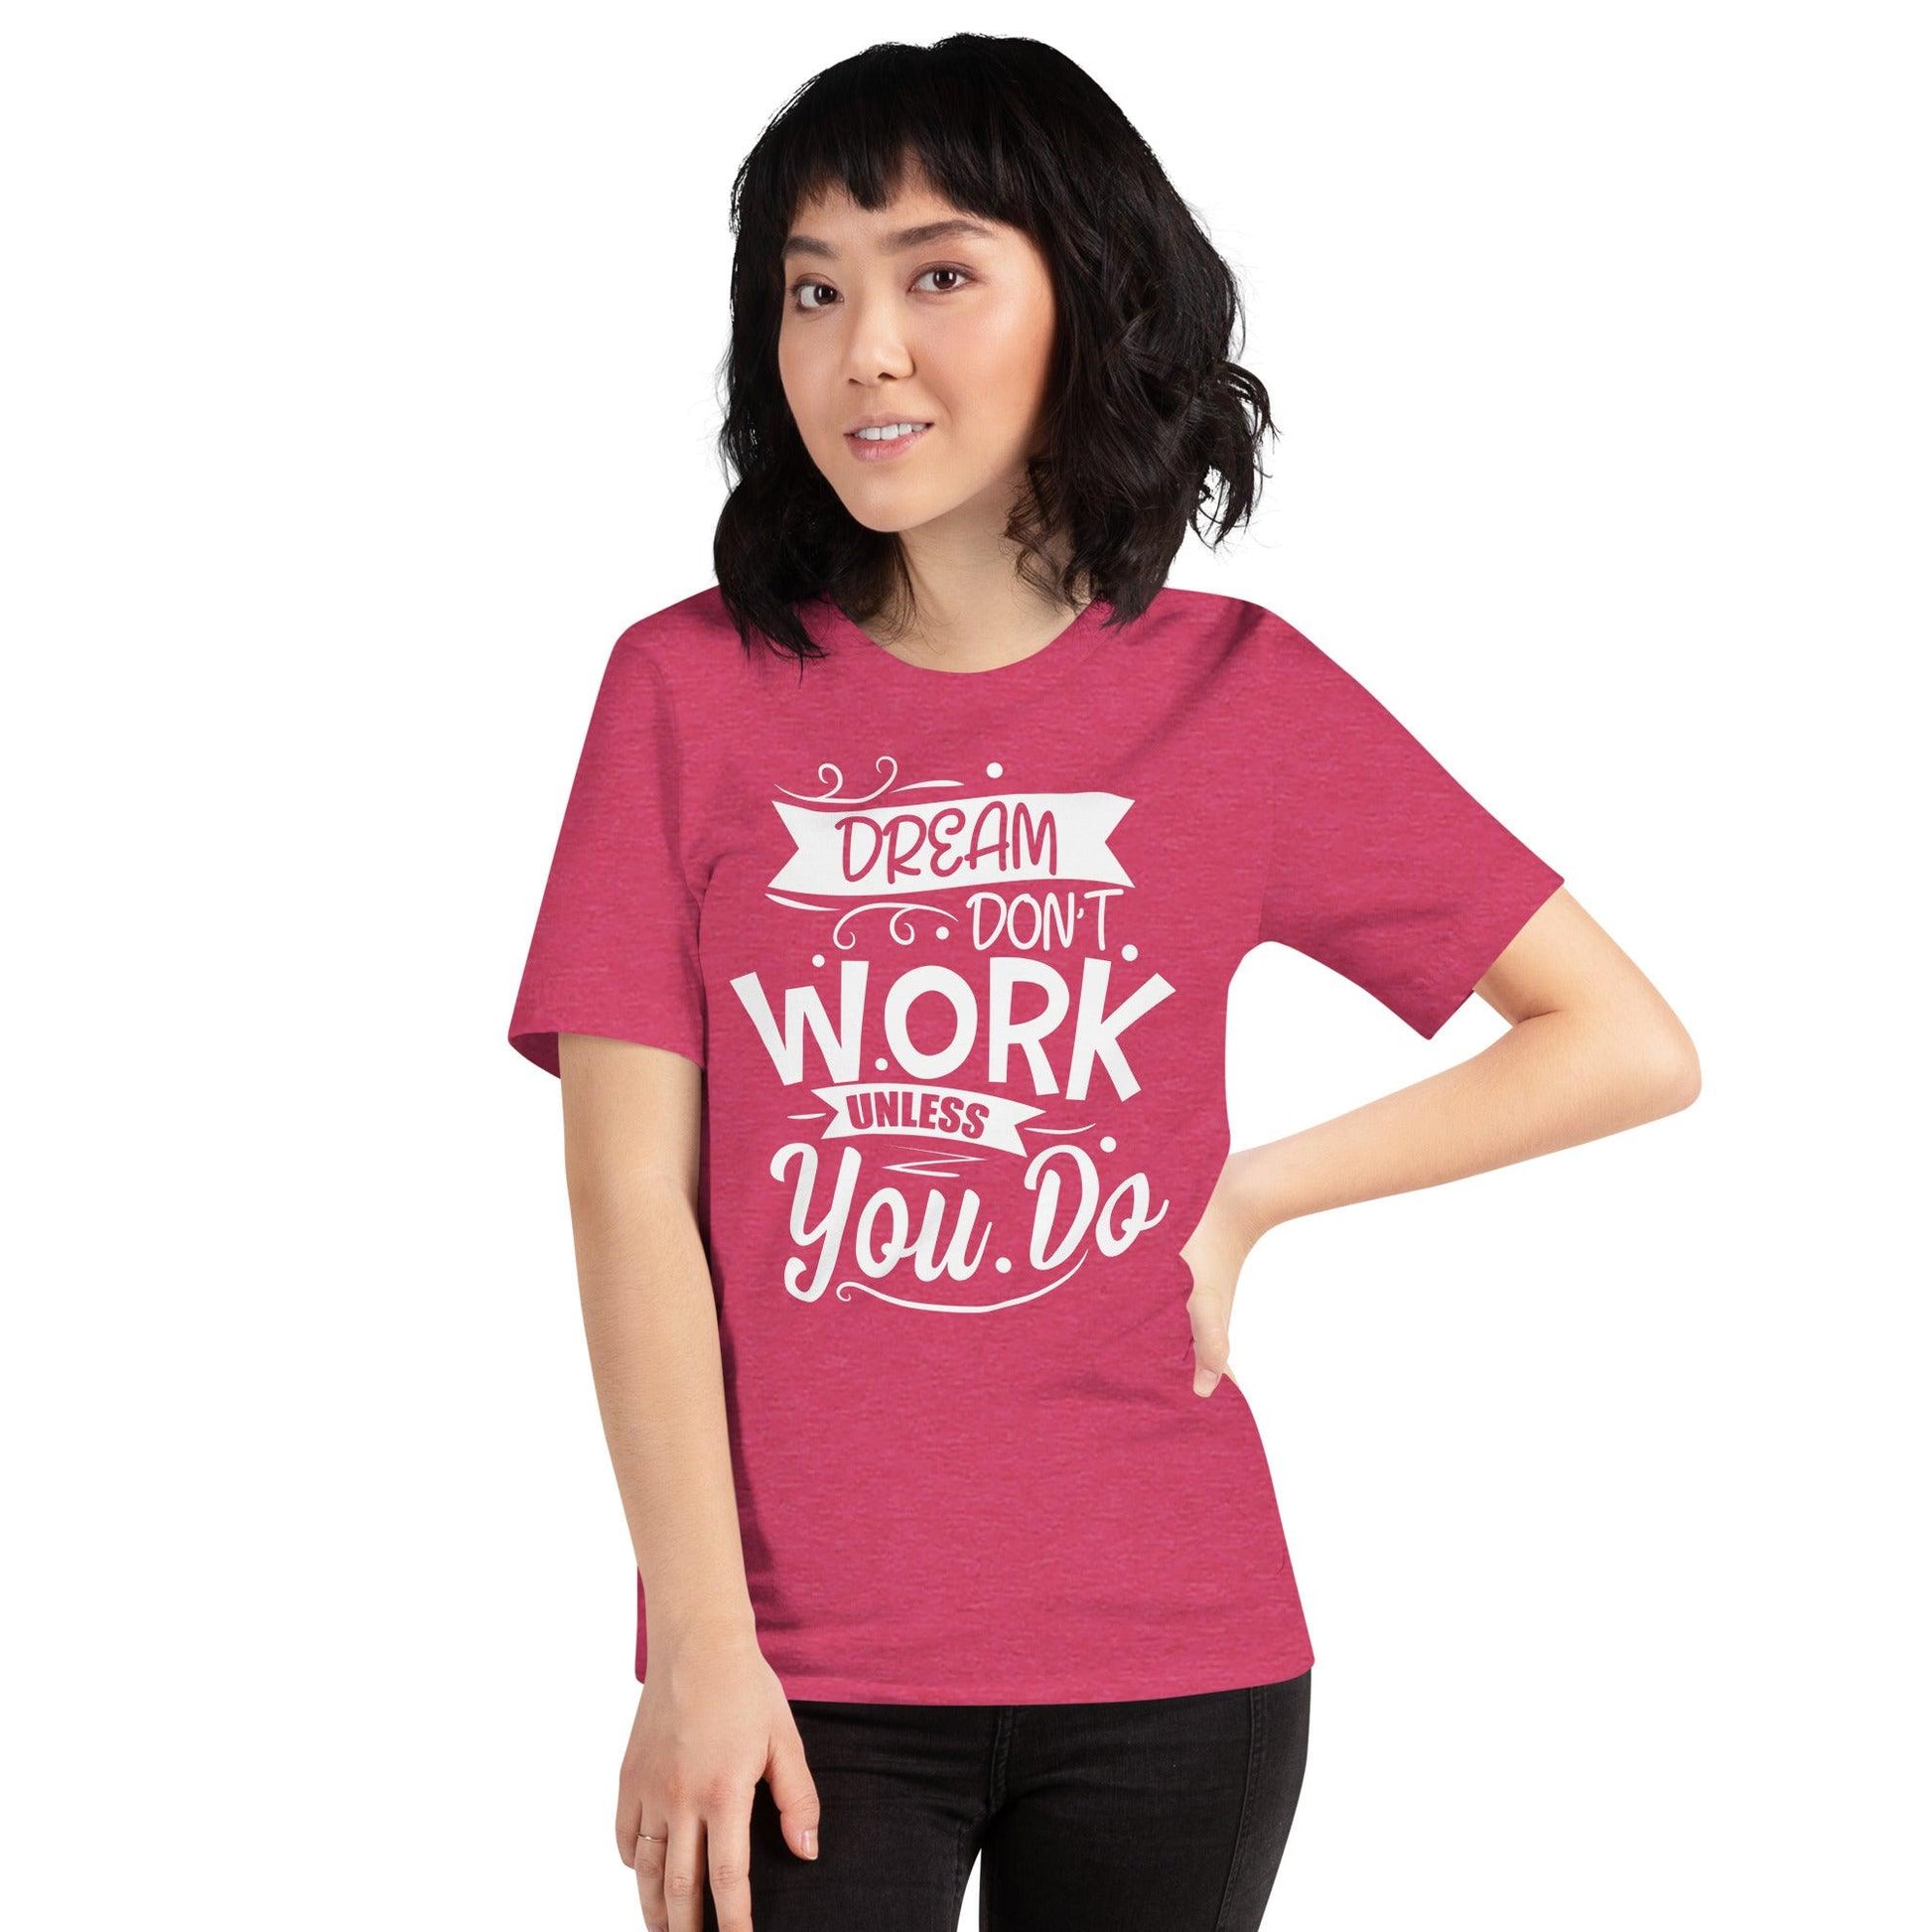 Dreams Don't Work Unless You Do | Women's Shirt With Quotes - Affirm Effect